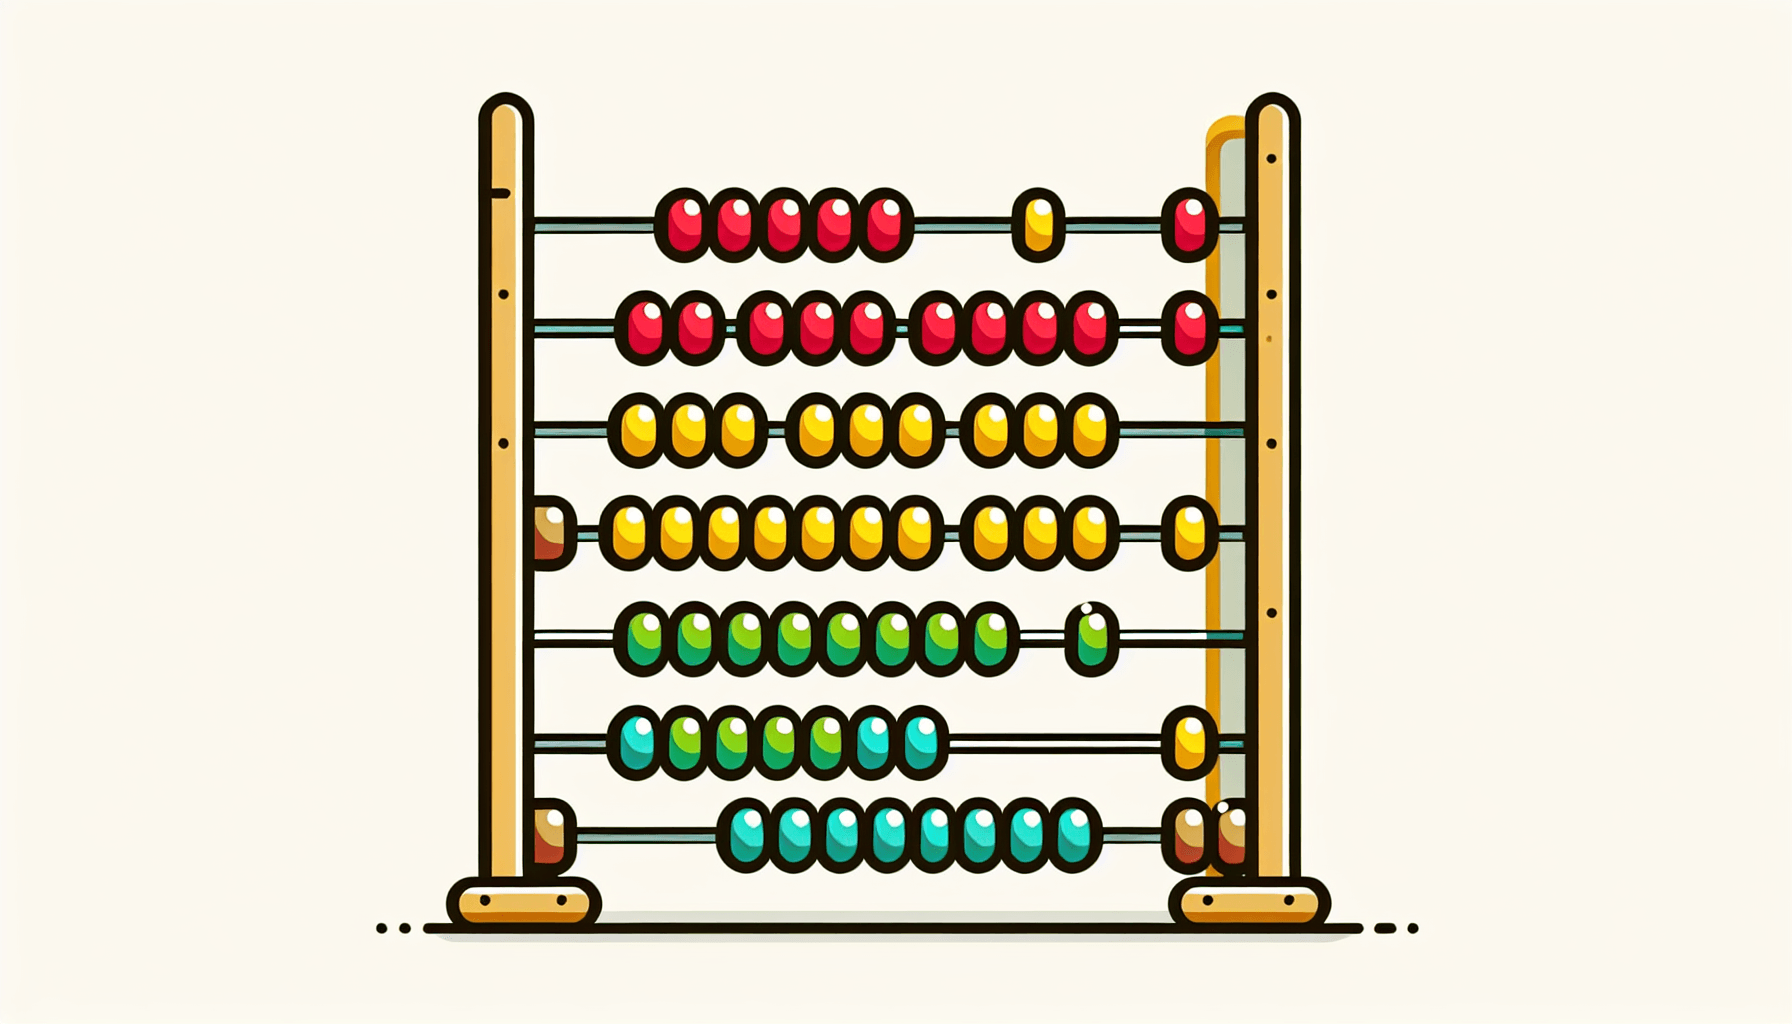 Abacus in flat illustration style and white background, red #f47574, green #88c7a8, yellow #fcc44b, and blue #645bc8 colors.